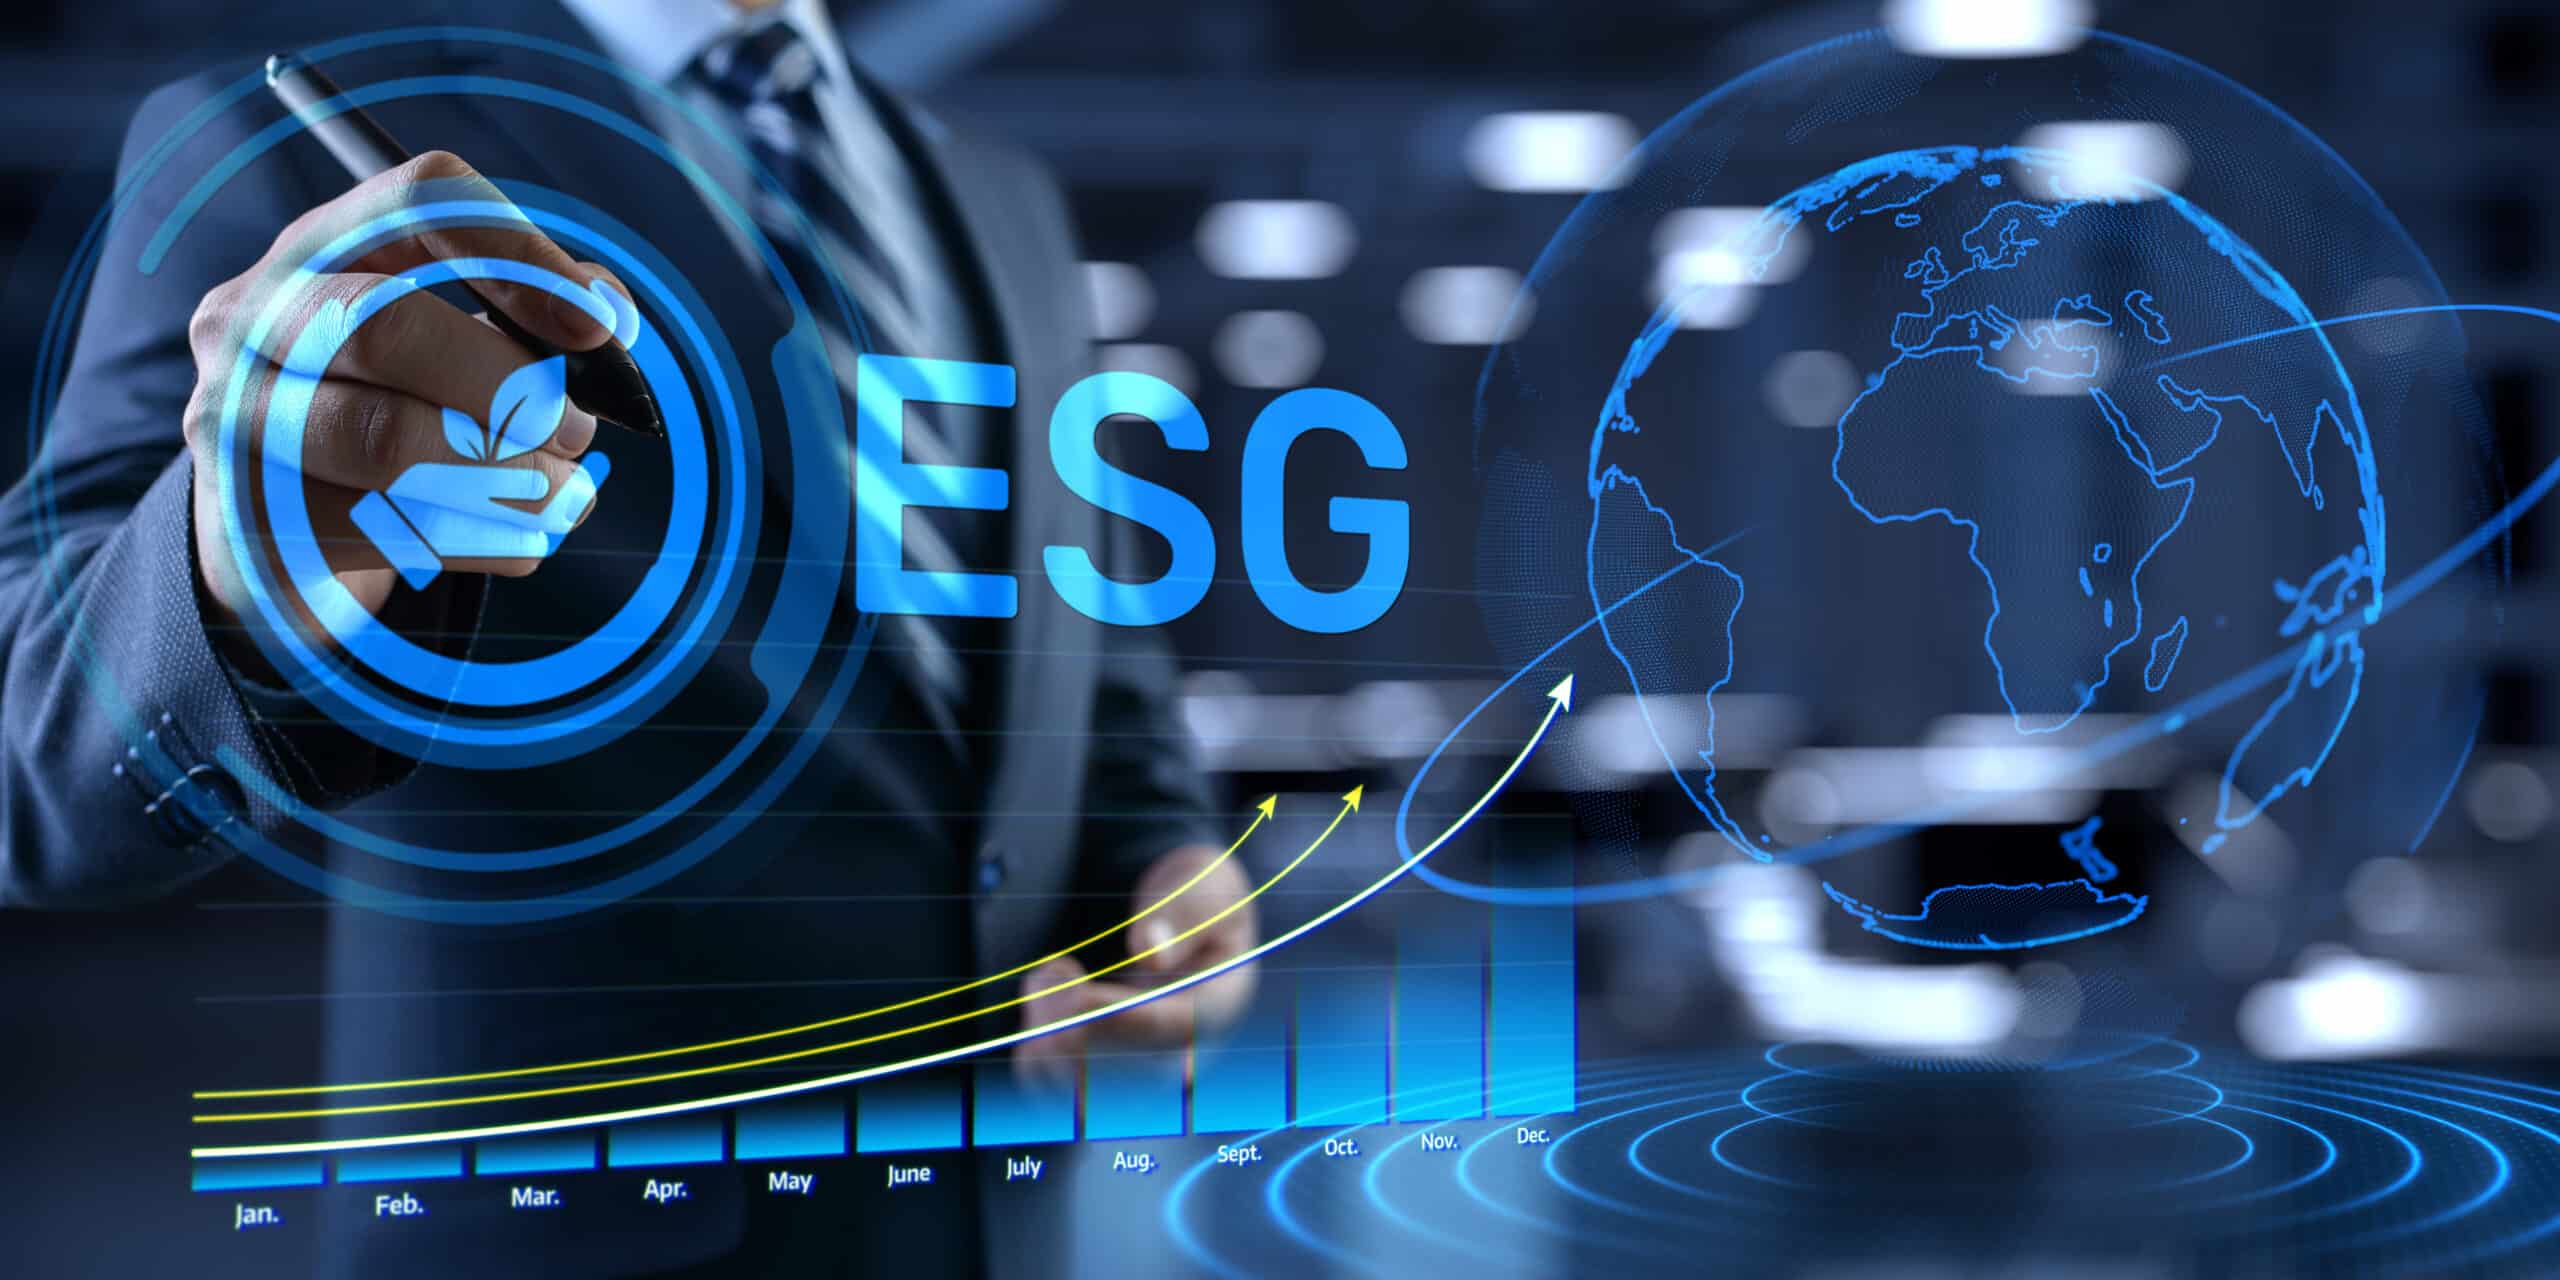 ESG Strategy: Moving up the curve